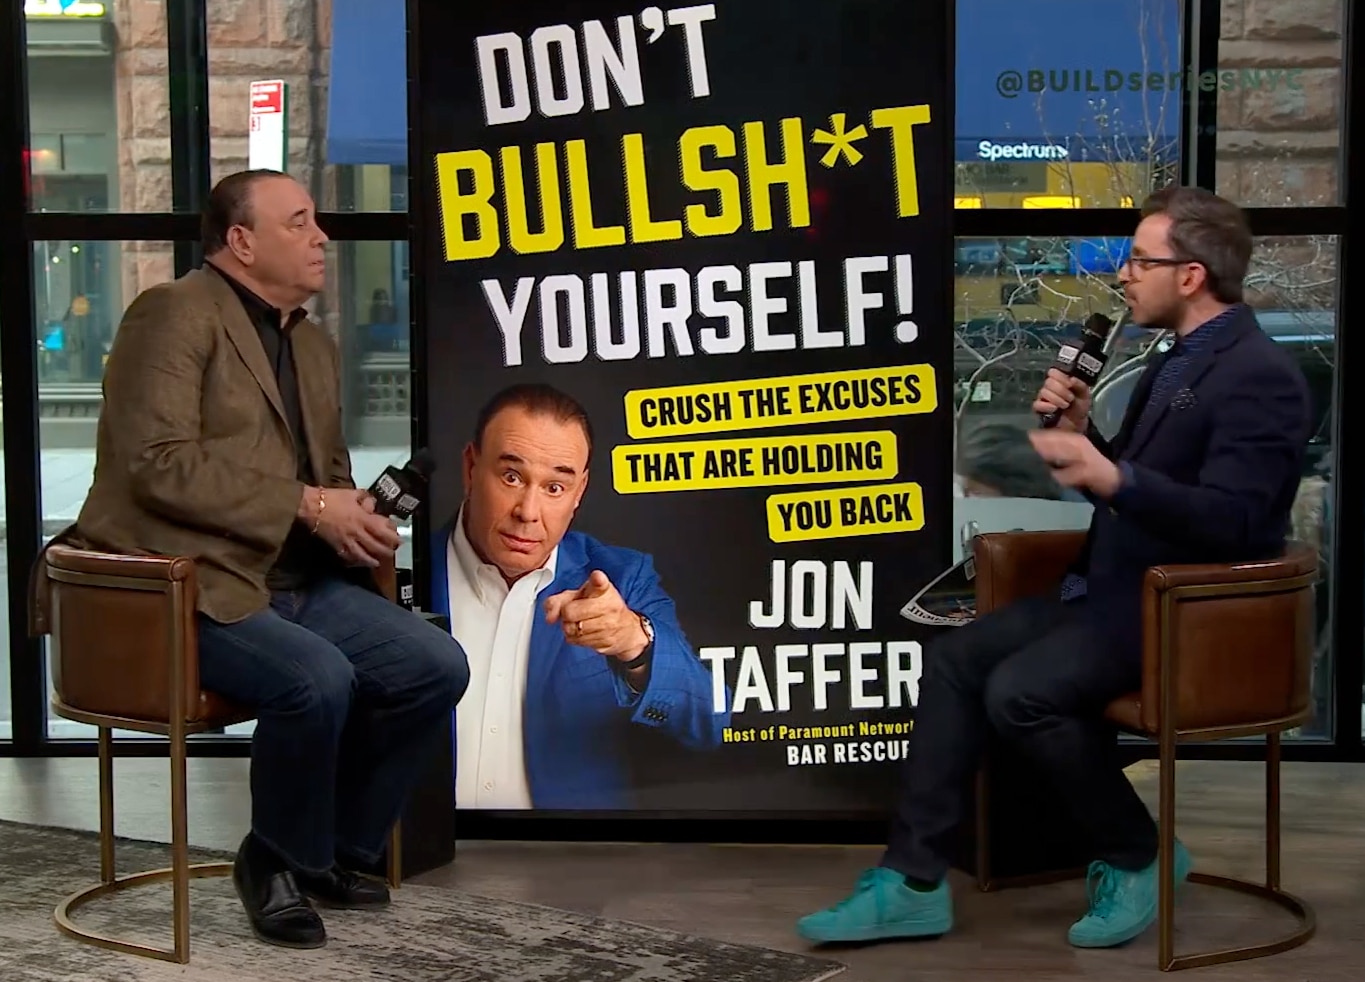 JON TAFFER SITS DOWN WITH BUILD TO SPEAK ON "DON’T BULLSH*T YOURSELF!"